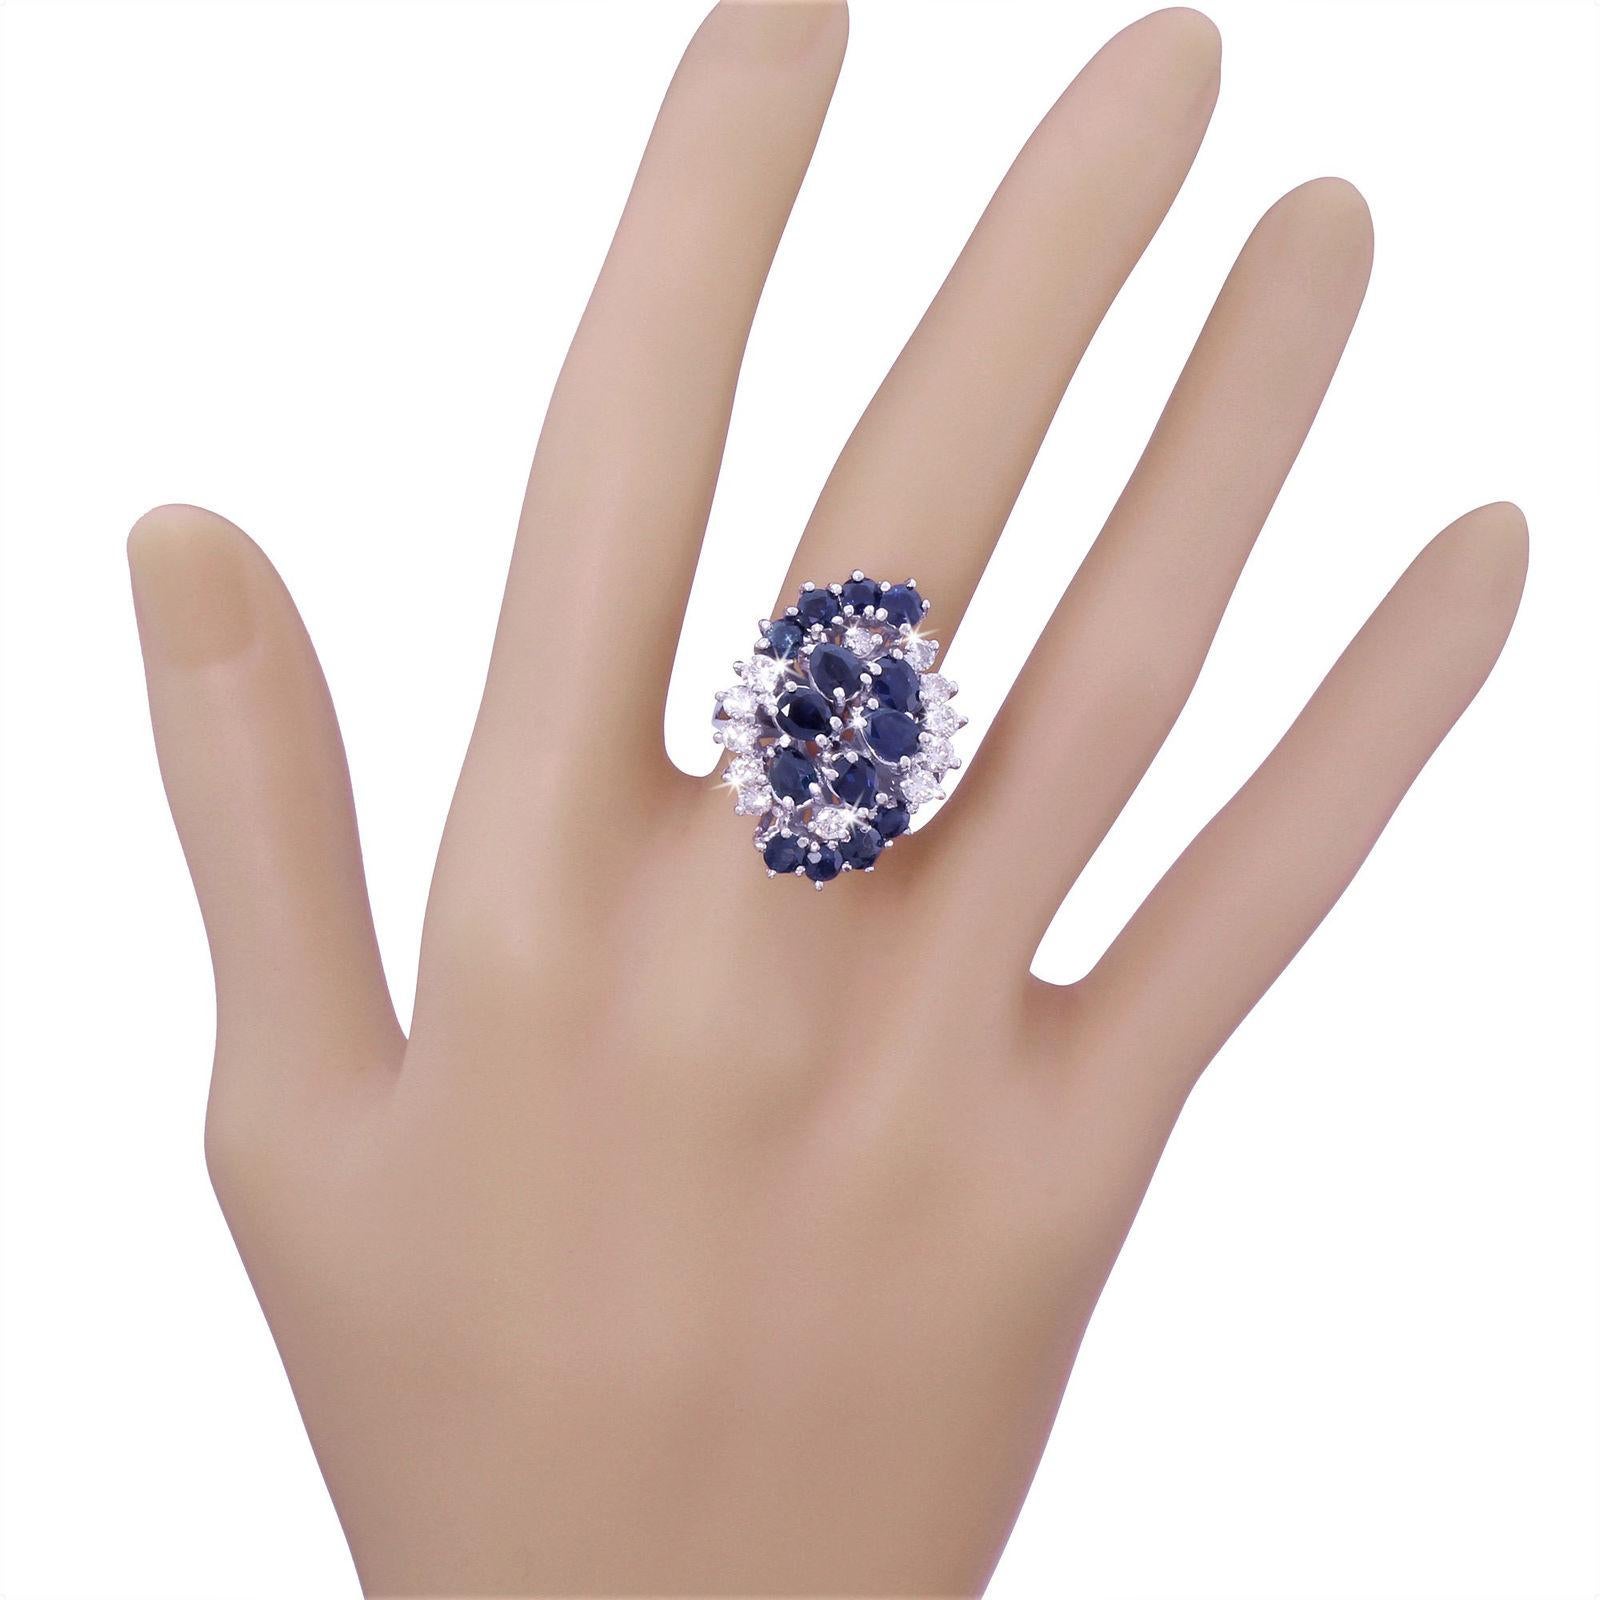 Spectacular 14 Karat Gold Large Sapphire Diamond Cluster Cocktail Ring 3.45 TW In Good Condition For Sale In Lauderdale by the Sea, FL